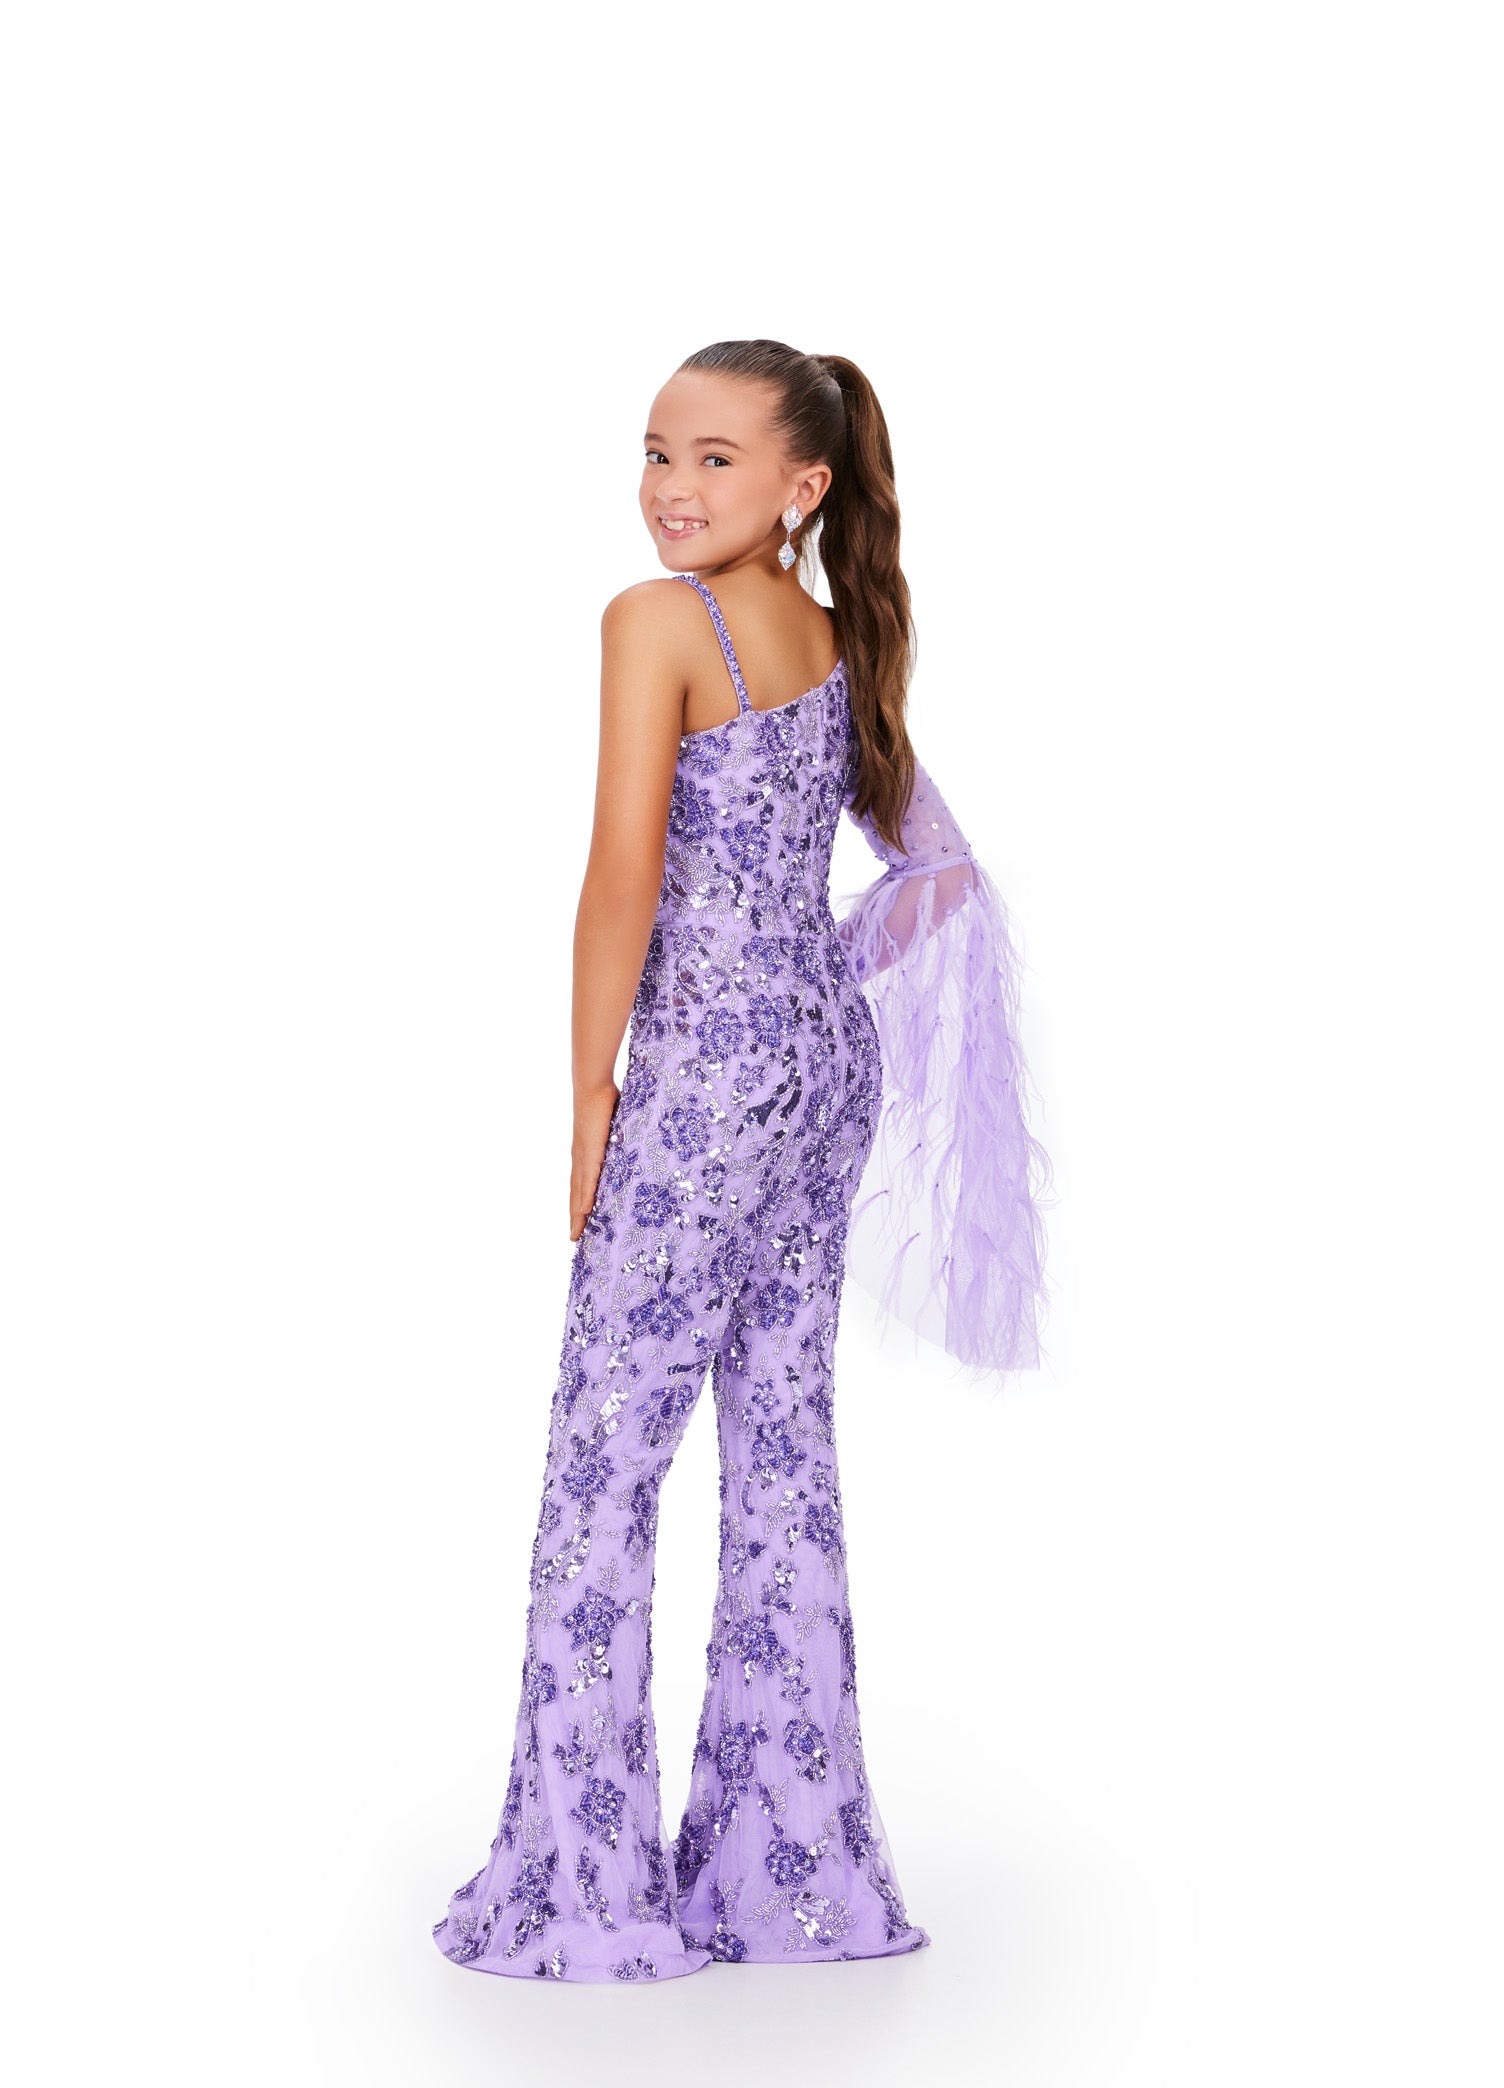 The Ashley Lauren Kids 8268 Girls Beaded Pageant Jumpsuit is a must-have for any fashion-forward young lady. Adorned with intricate beadwork and featuring dramatic feather bell sleeves, this jumpsuit will make her feel like a true fashionista. Perfect for pageants or any special occasion, it's both stylish and fun. This one shoulder kids jumpsuit features an intricate bead pattern throughout. The look is complete with a bell-sleeve scattered with feathers.